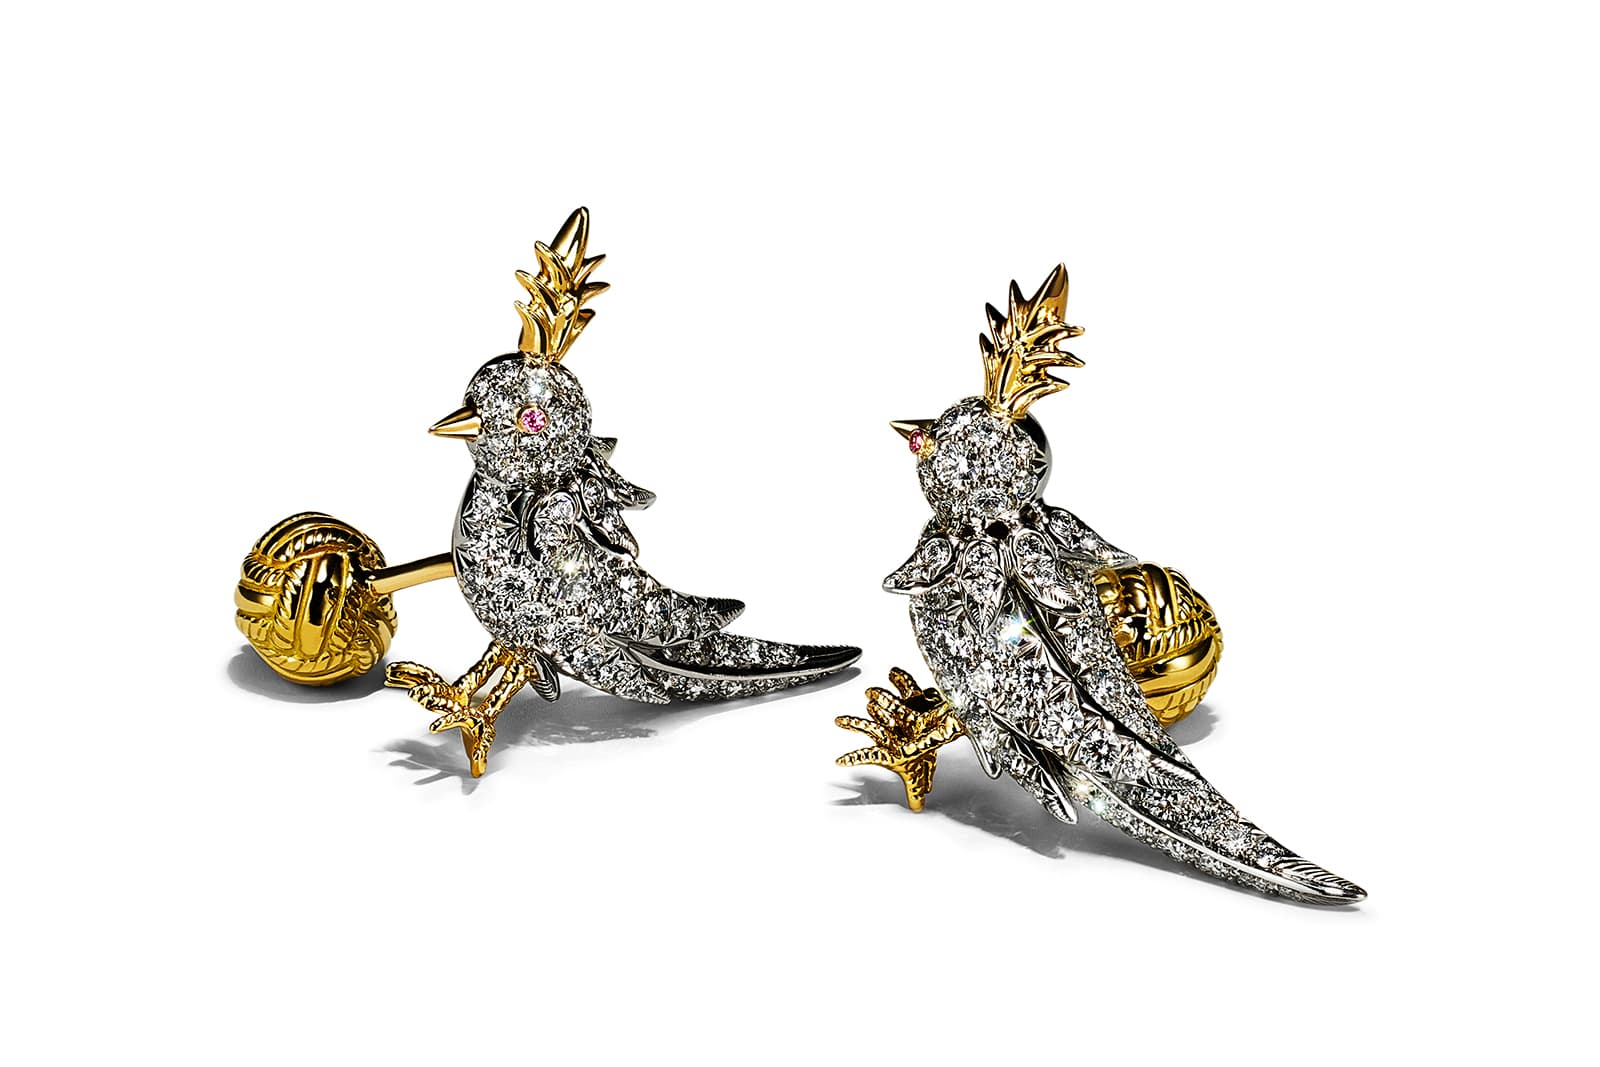 Custom designed Tiffany & Co. Schlumberger® Bird cuff links in platinum and 18k yellow gold with diamonds, due to launch in 2022 